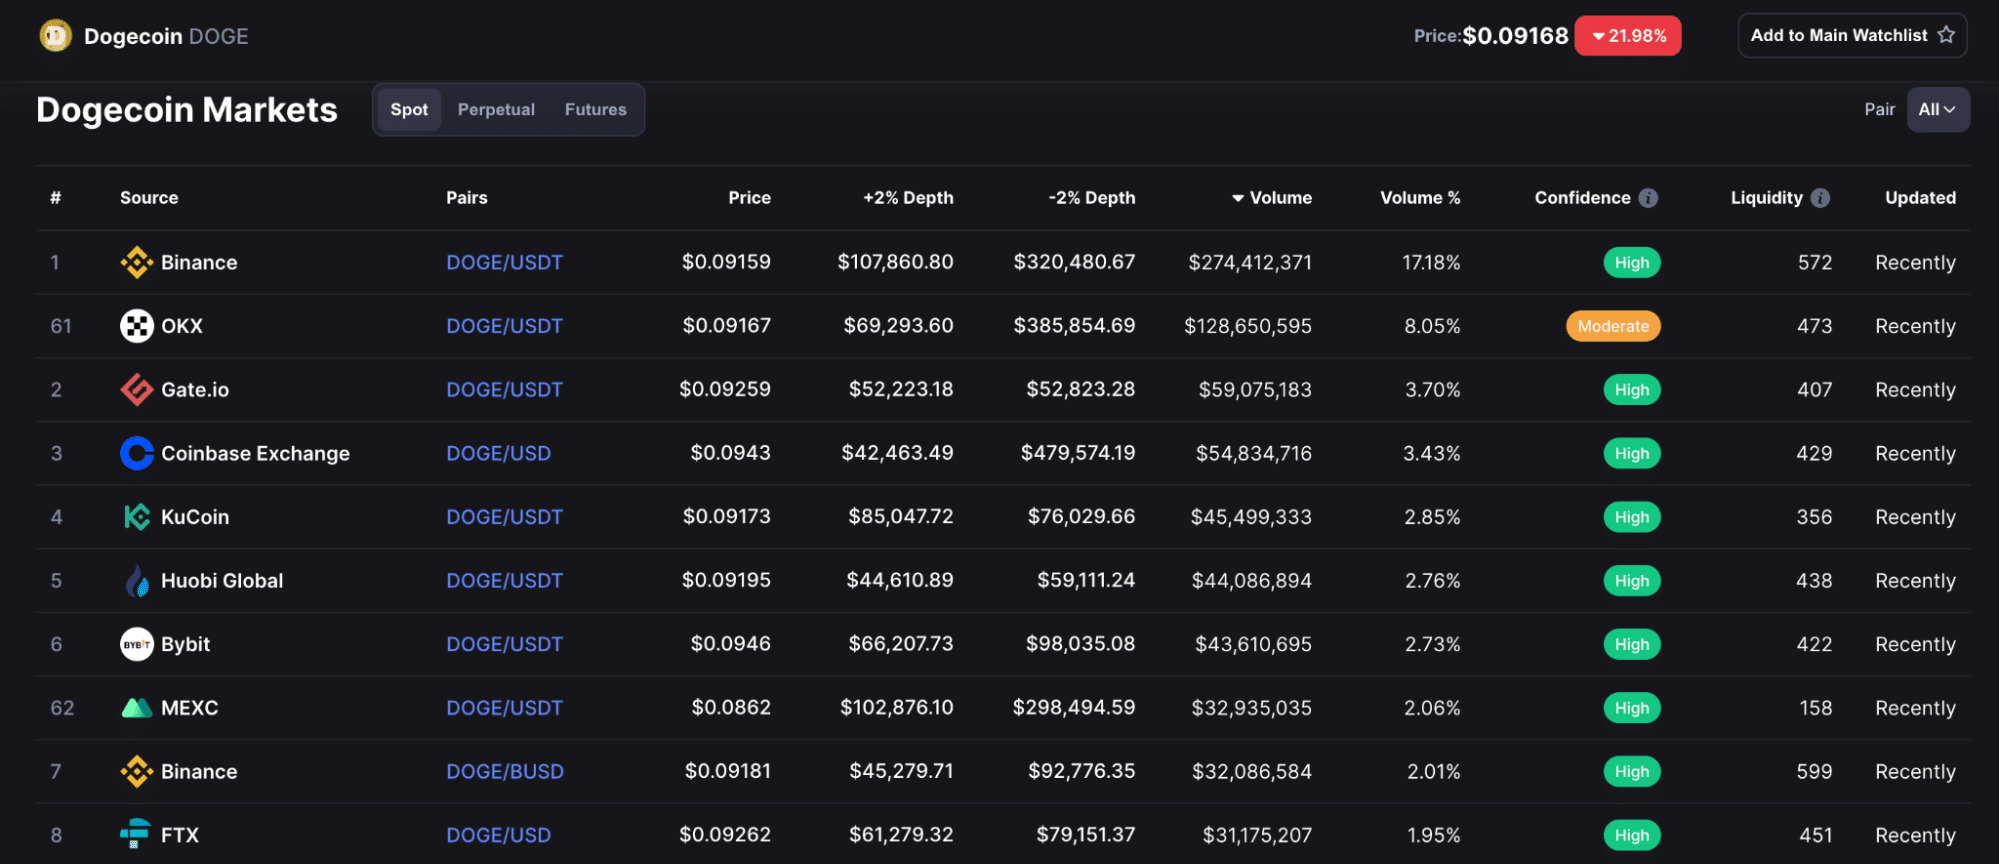 Top Dogecoin markets ranked by trading volume according to CoinMarketCap